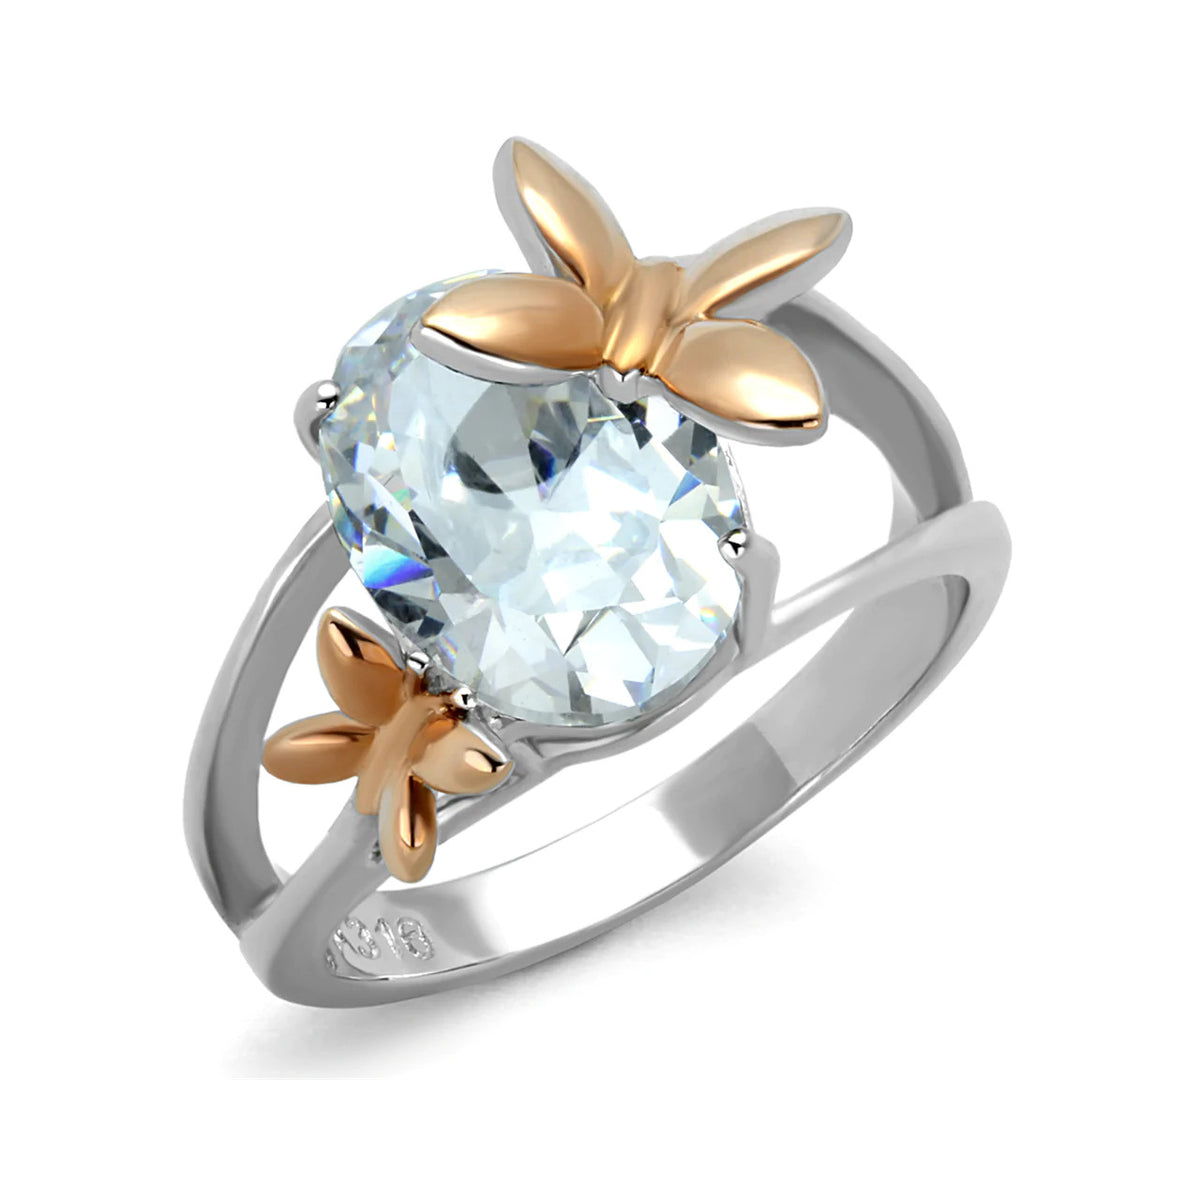 CJE2135 Two-Tone Oval CZ Butterfly Ring.